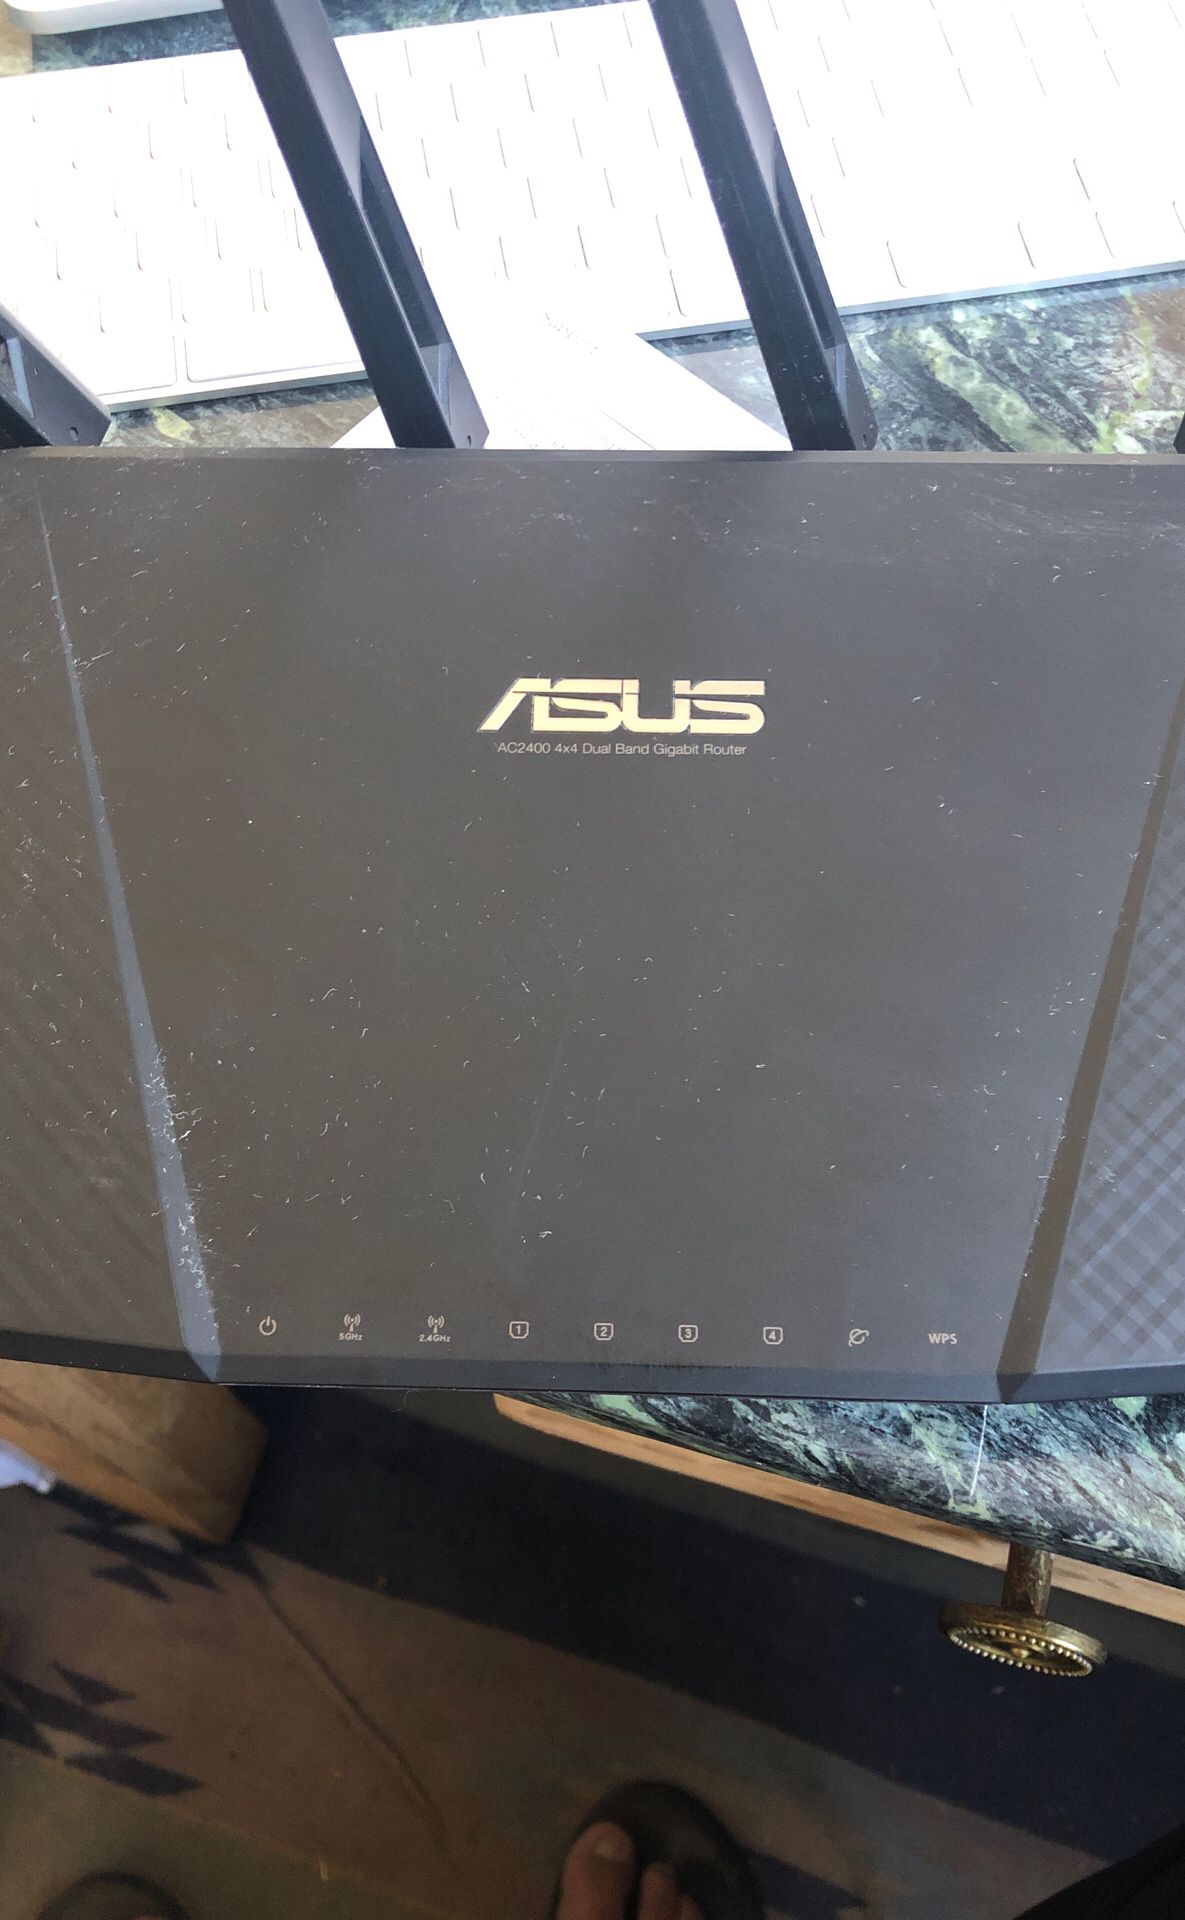 ASUS duel-band wireless Router (RT-AC87U)